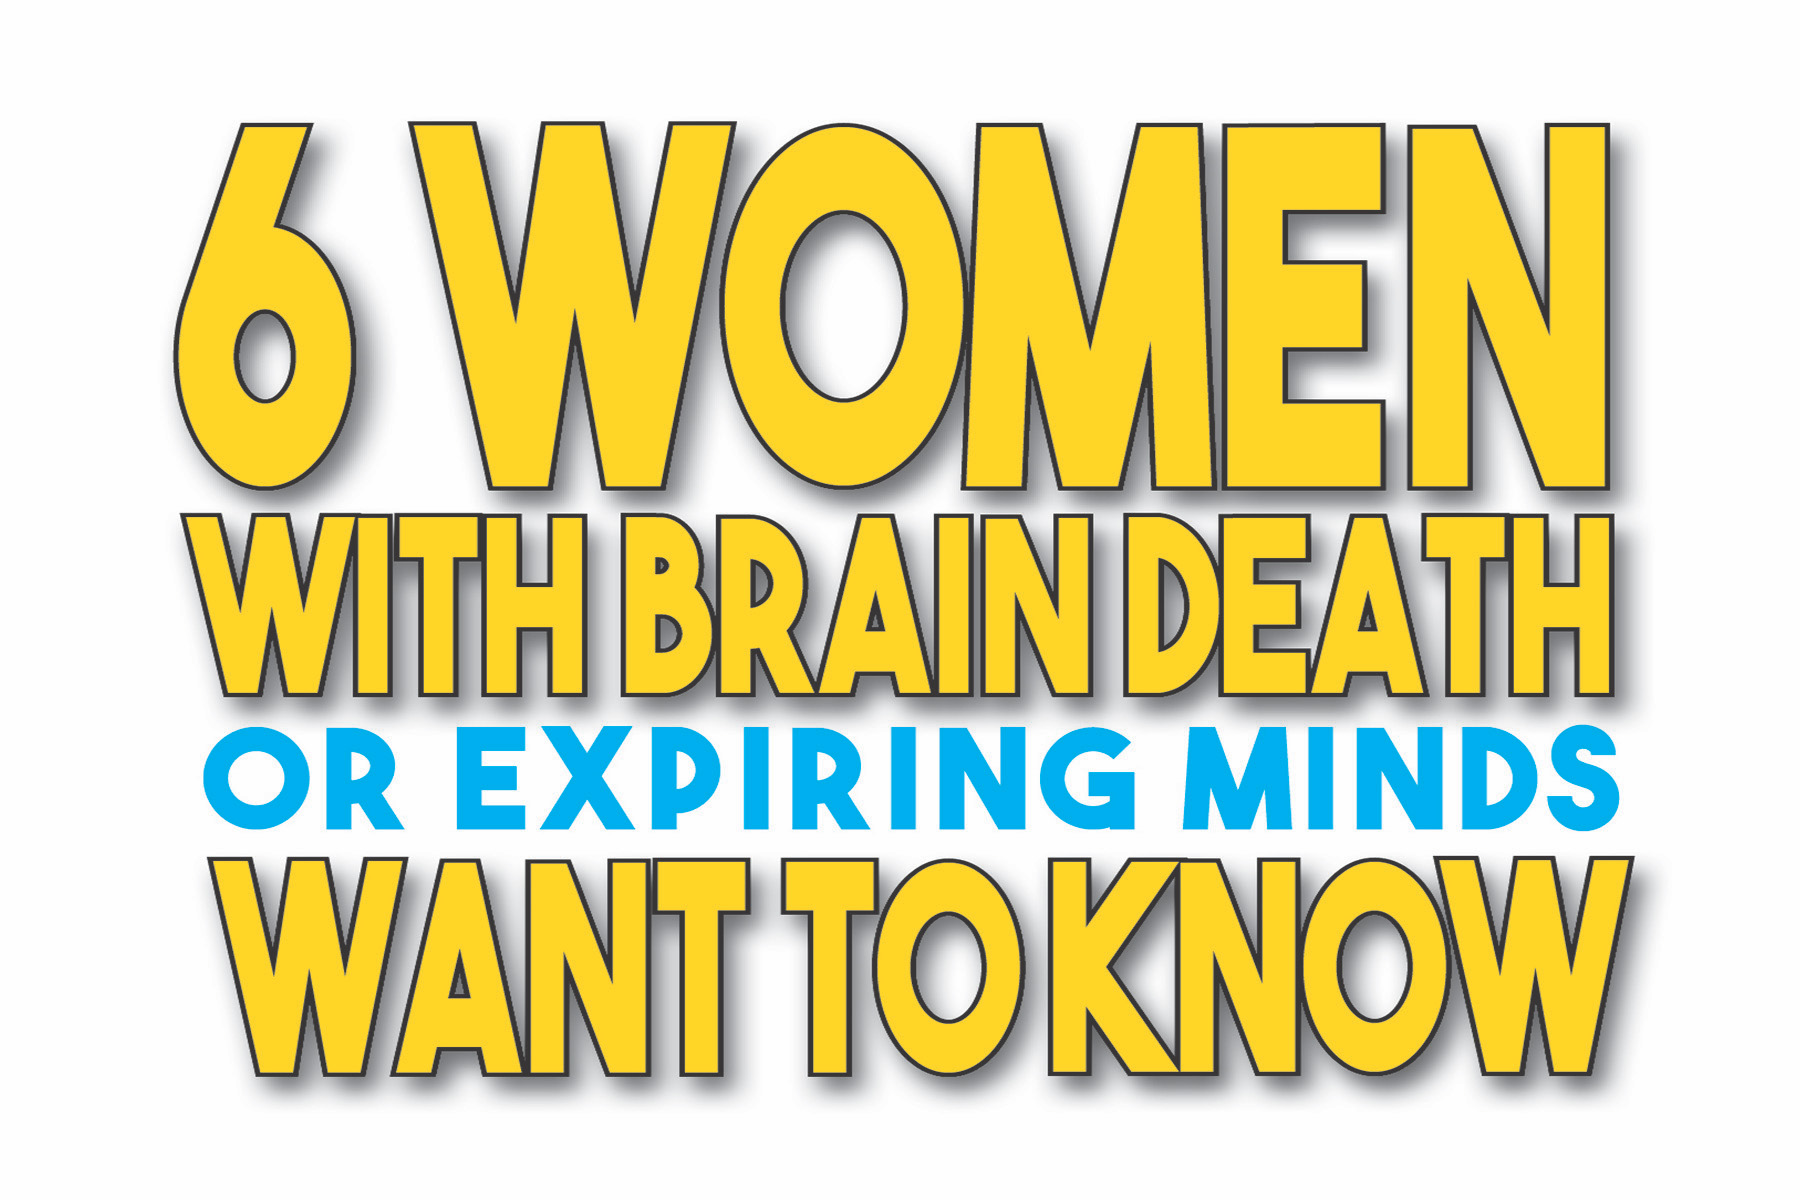 Six Women with Brain Death or Expiring Minds Want to Know